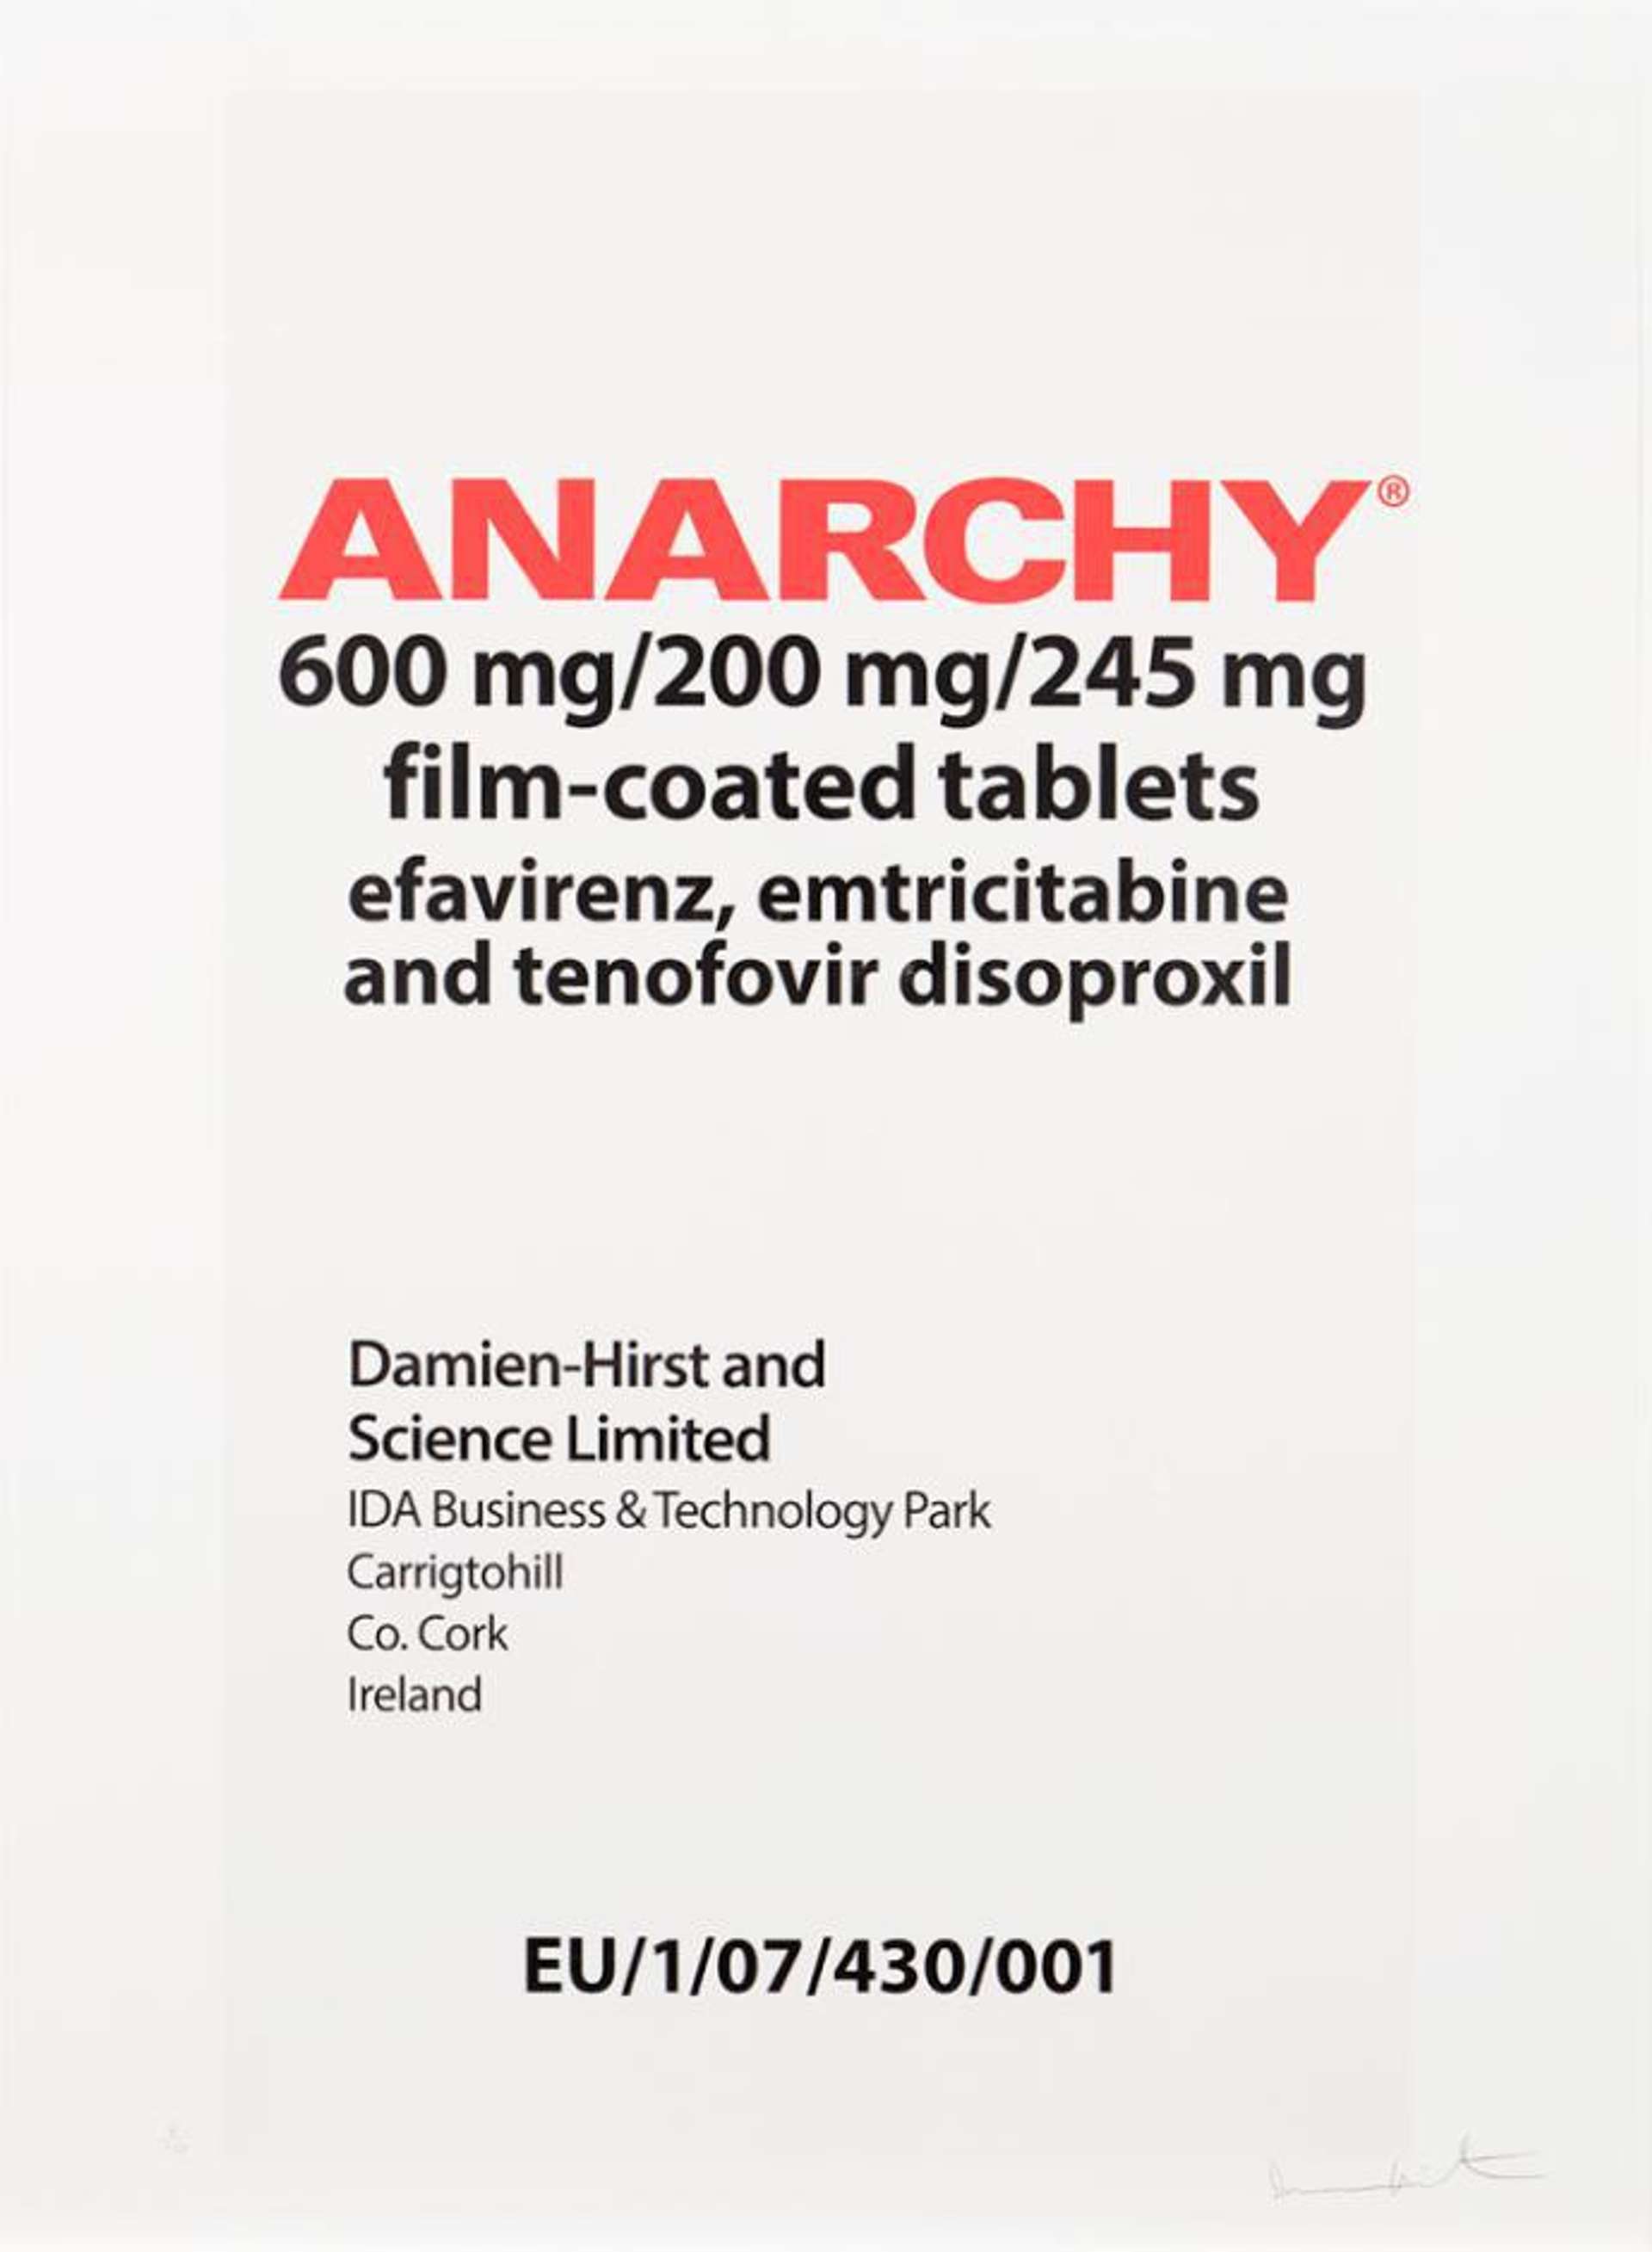 Damien Hirst’s Anarchy. A screenprint of a white pharmaceutical box with various texts including “anarchy ® 600 mg”. 